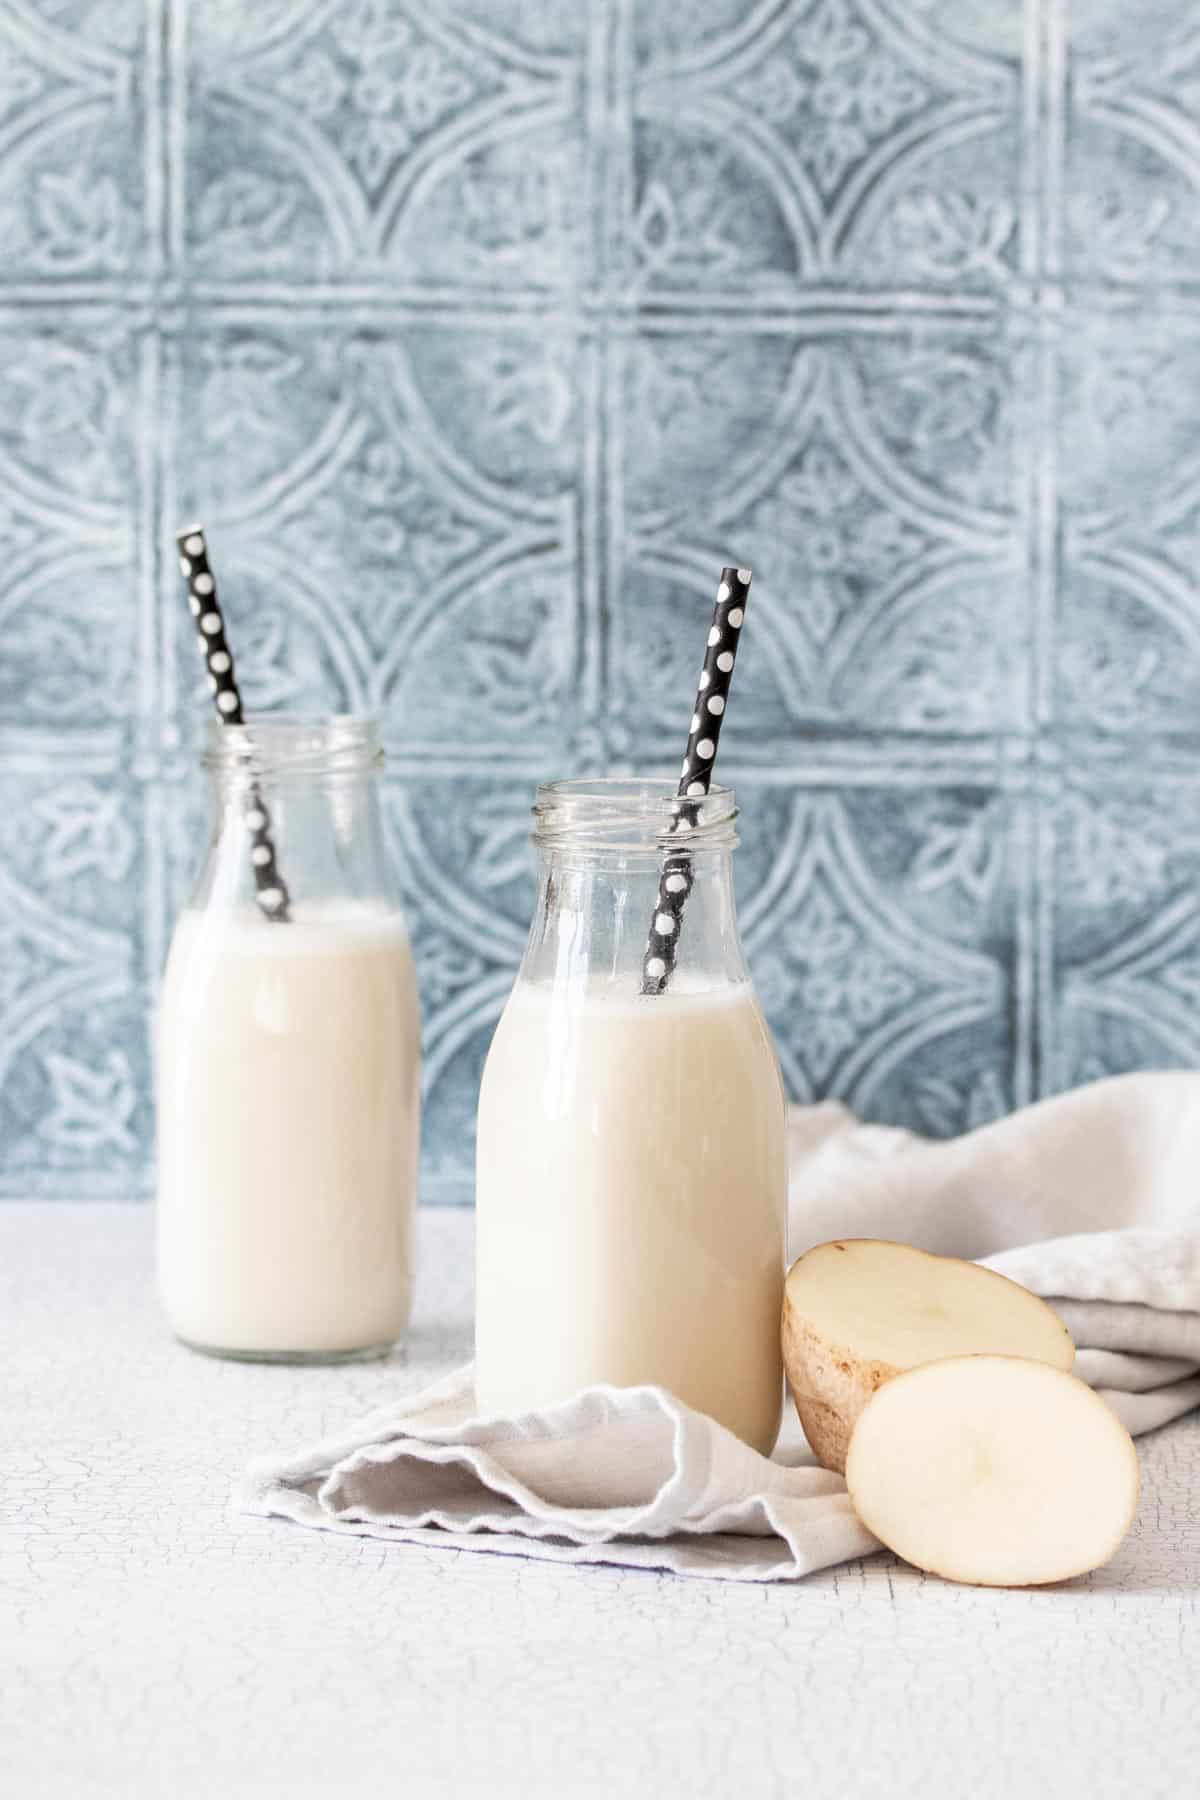 alt="Two glass milk jars filled with milk and black straws with a cut potato next to the one in front on a kitchen counter"